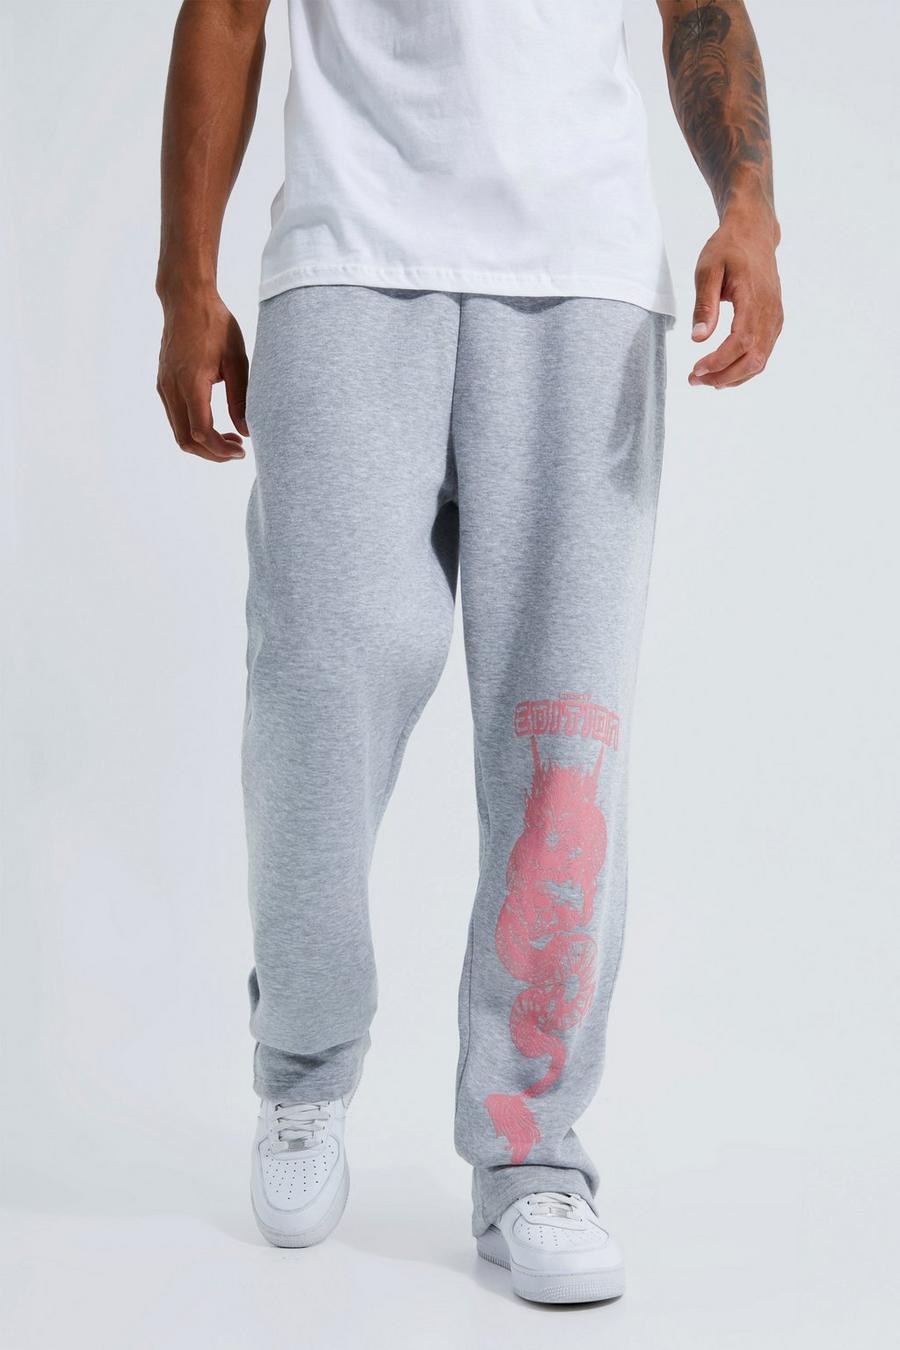 Tall lockere Limited Edition Drachen Jogginghose, Grey marl image number 1